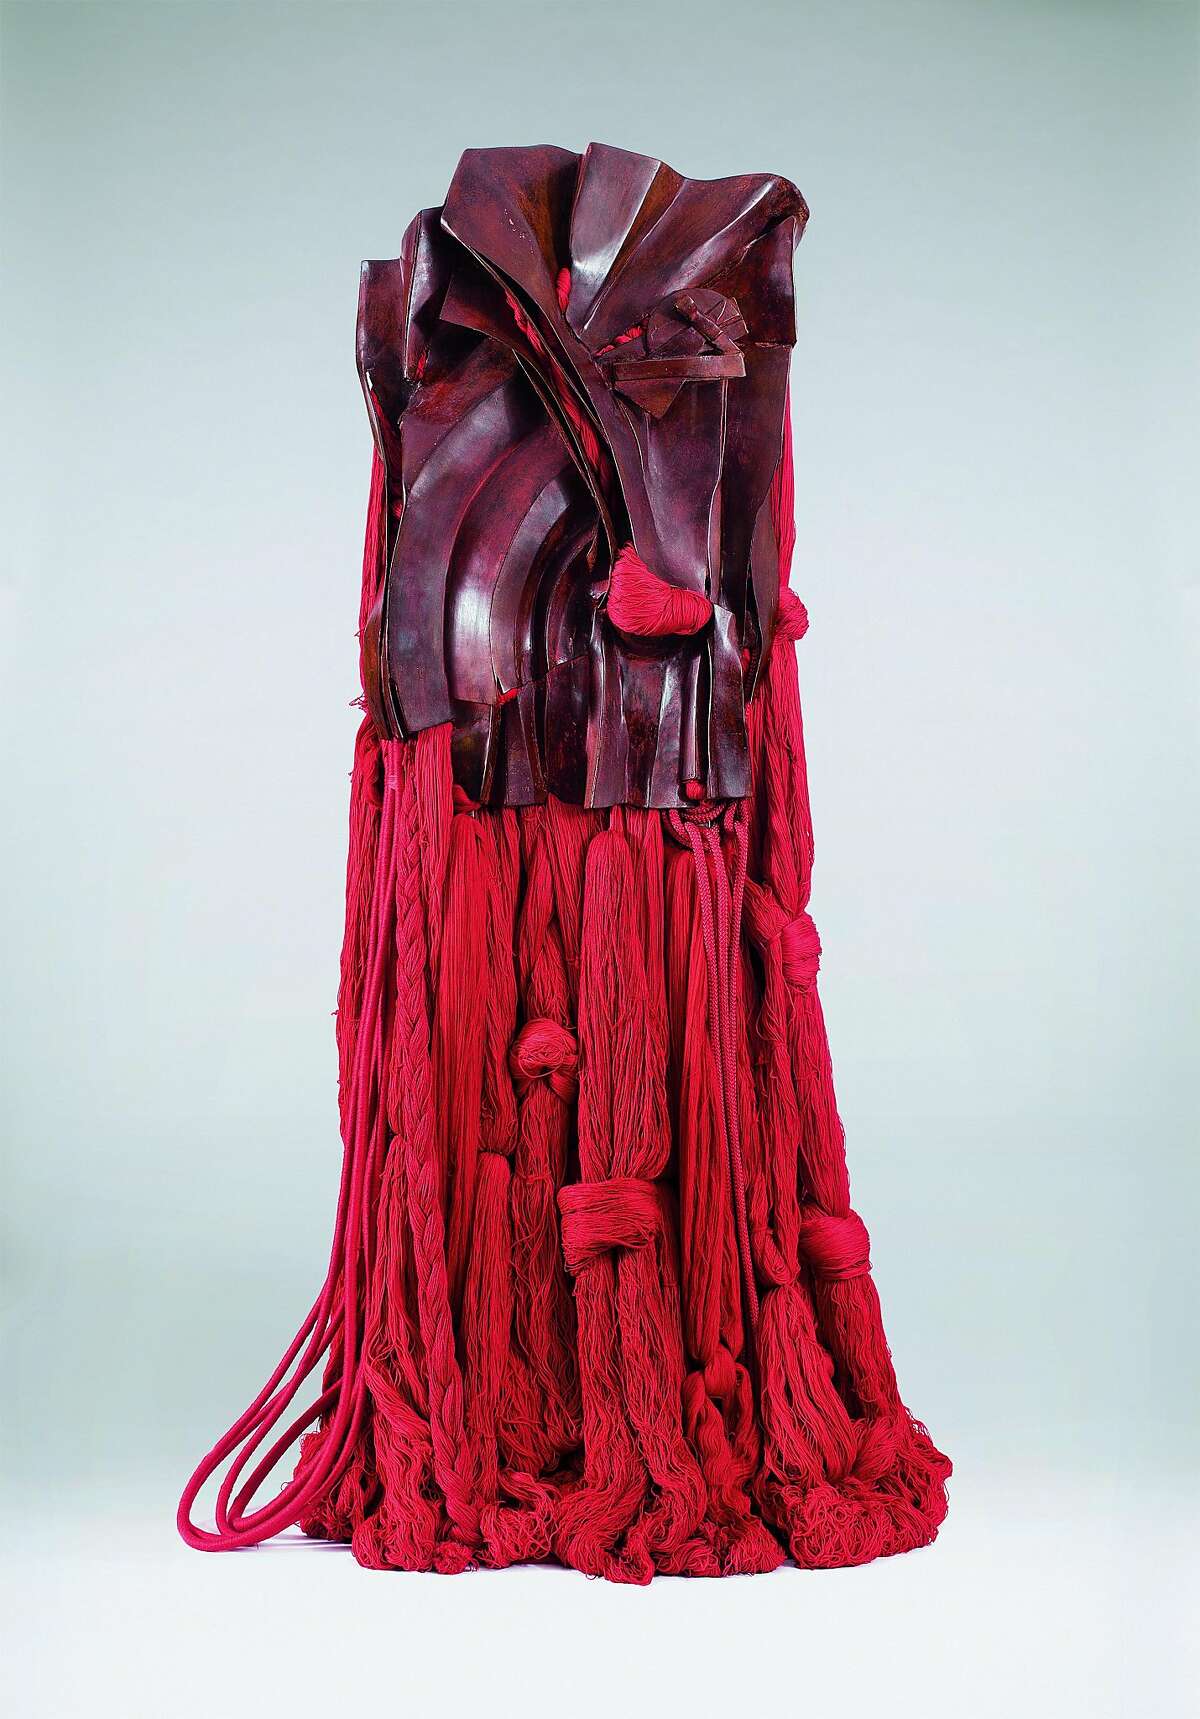 Barbara Chase-Riboud: All That Rises Must Converge / Red, 2008; red bronze, silk, cotton, and synthetic fibers; 74 ½ x 42 x 28 in.; courtesy of the artist.